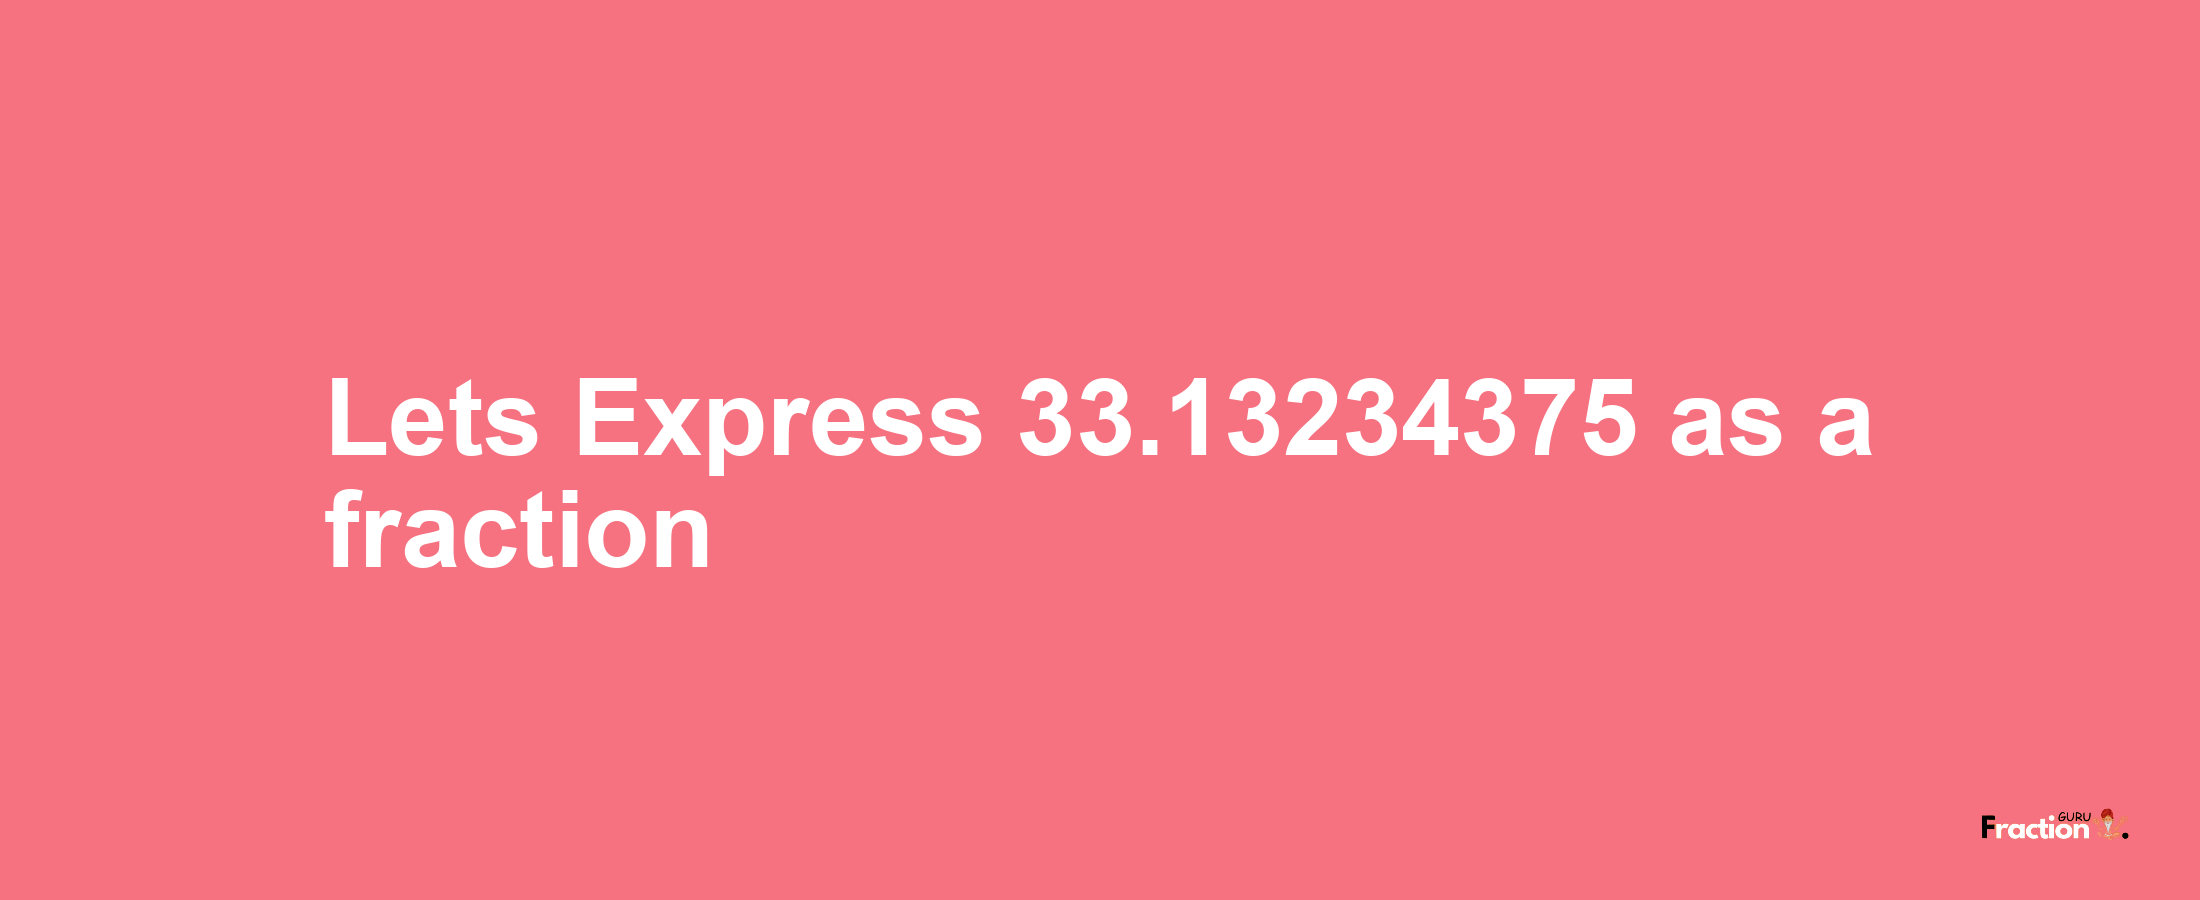 Lets Express 33.13234375 as afraction